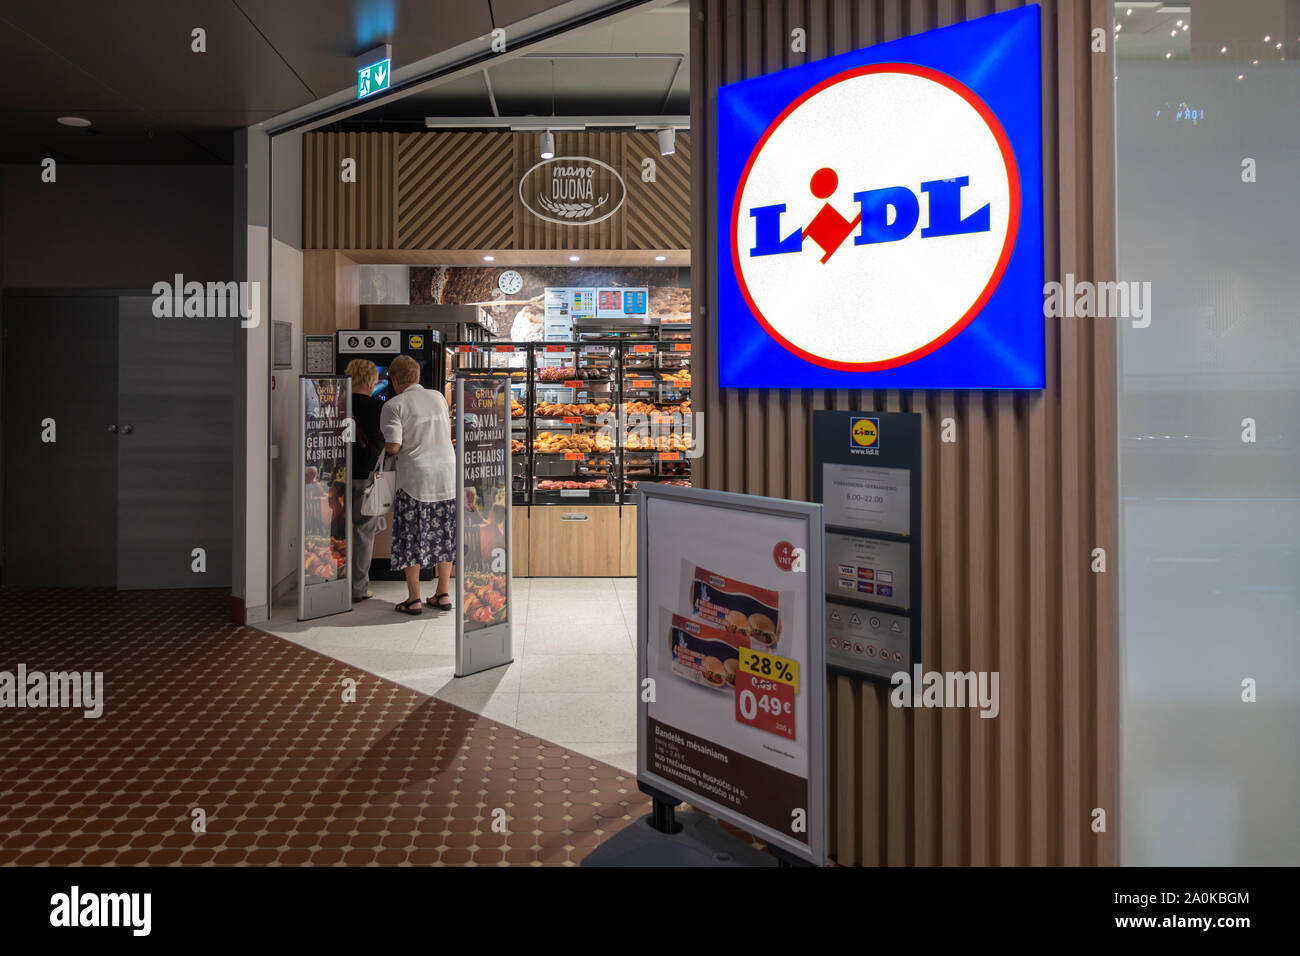 Lidl Store Stock Photos Lidl Store Stock Images Alamy